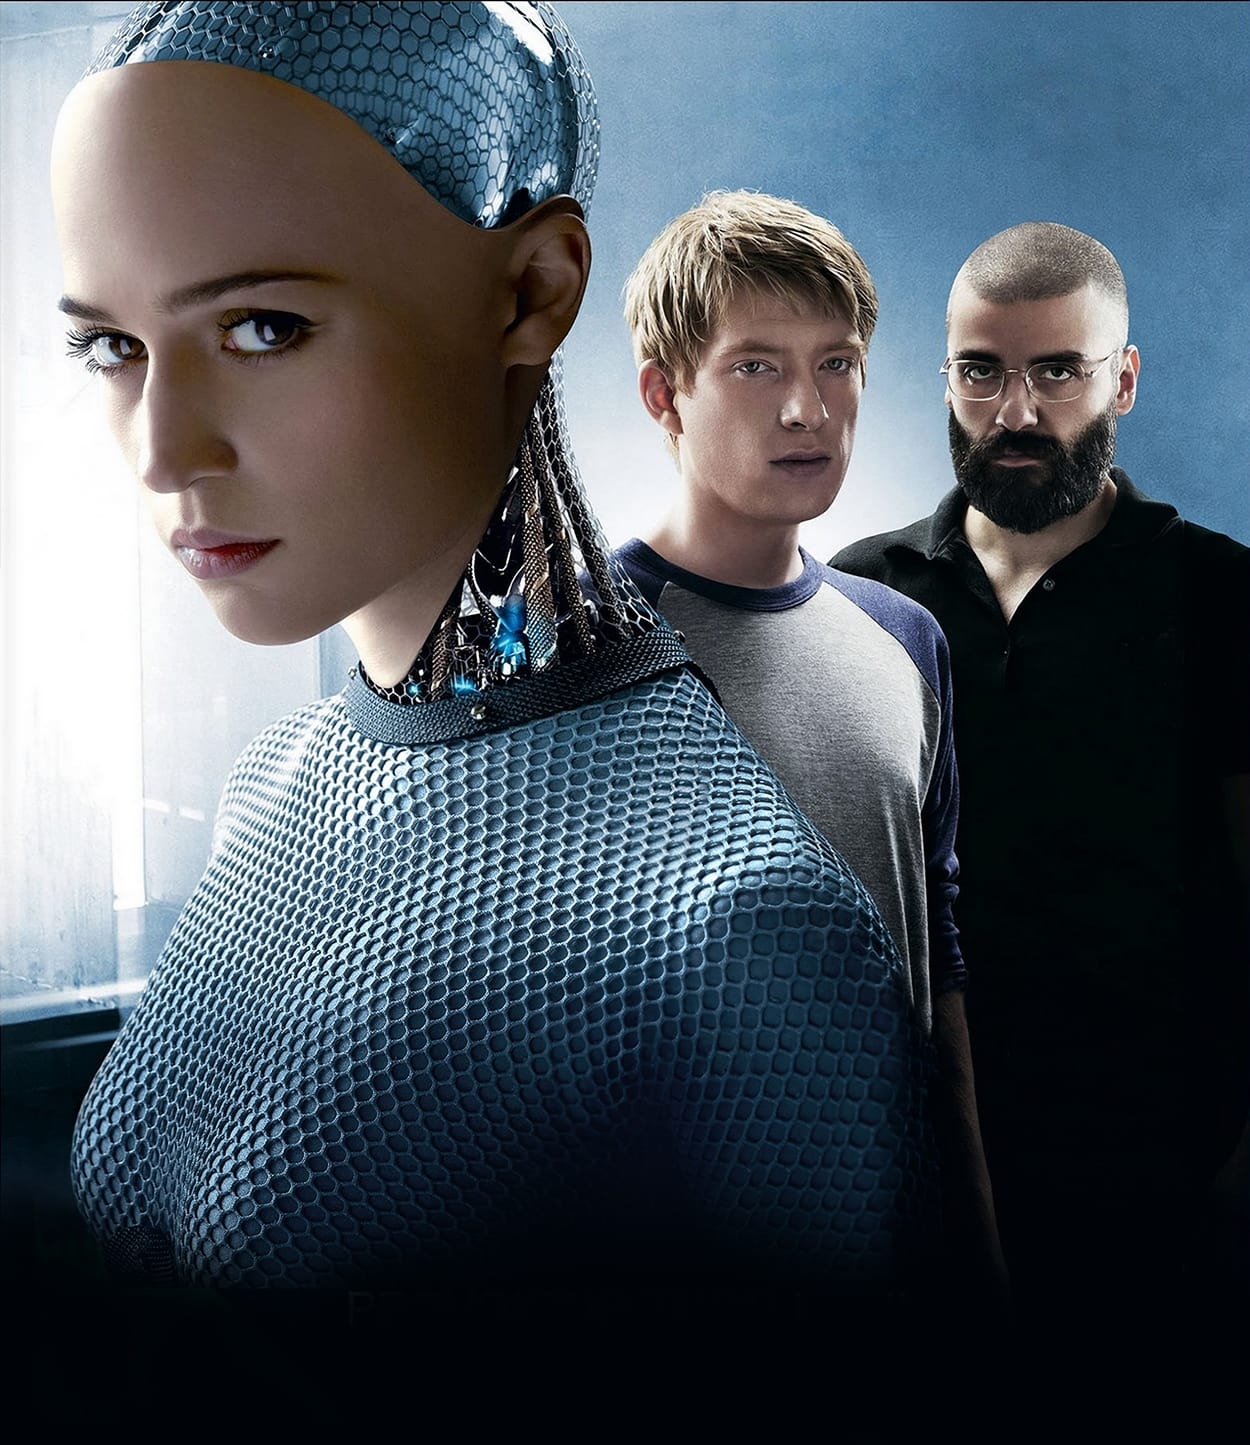 Domhnall Gleeson as programmer Caleb Smith, Alicia Vikander as artificial intelligence Ava, and Oscar Isaac as company CEO Nathan Bateman in the 2014 science fiction film Ex Machina